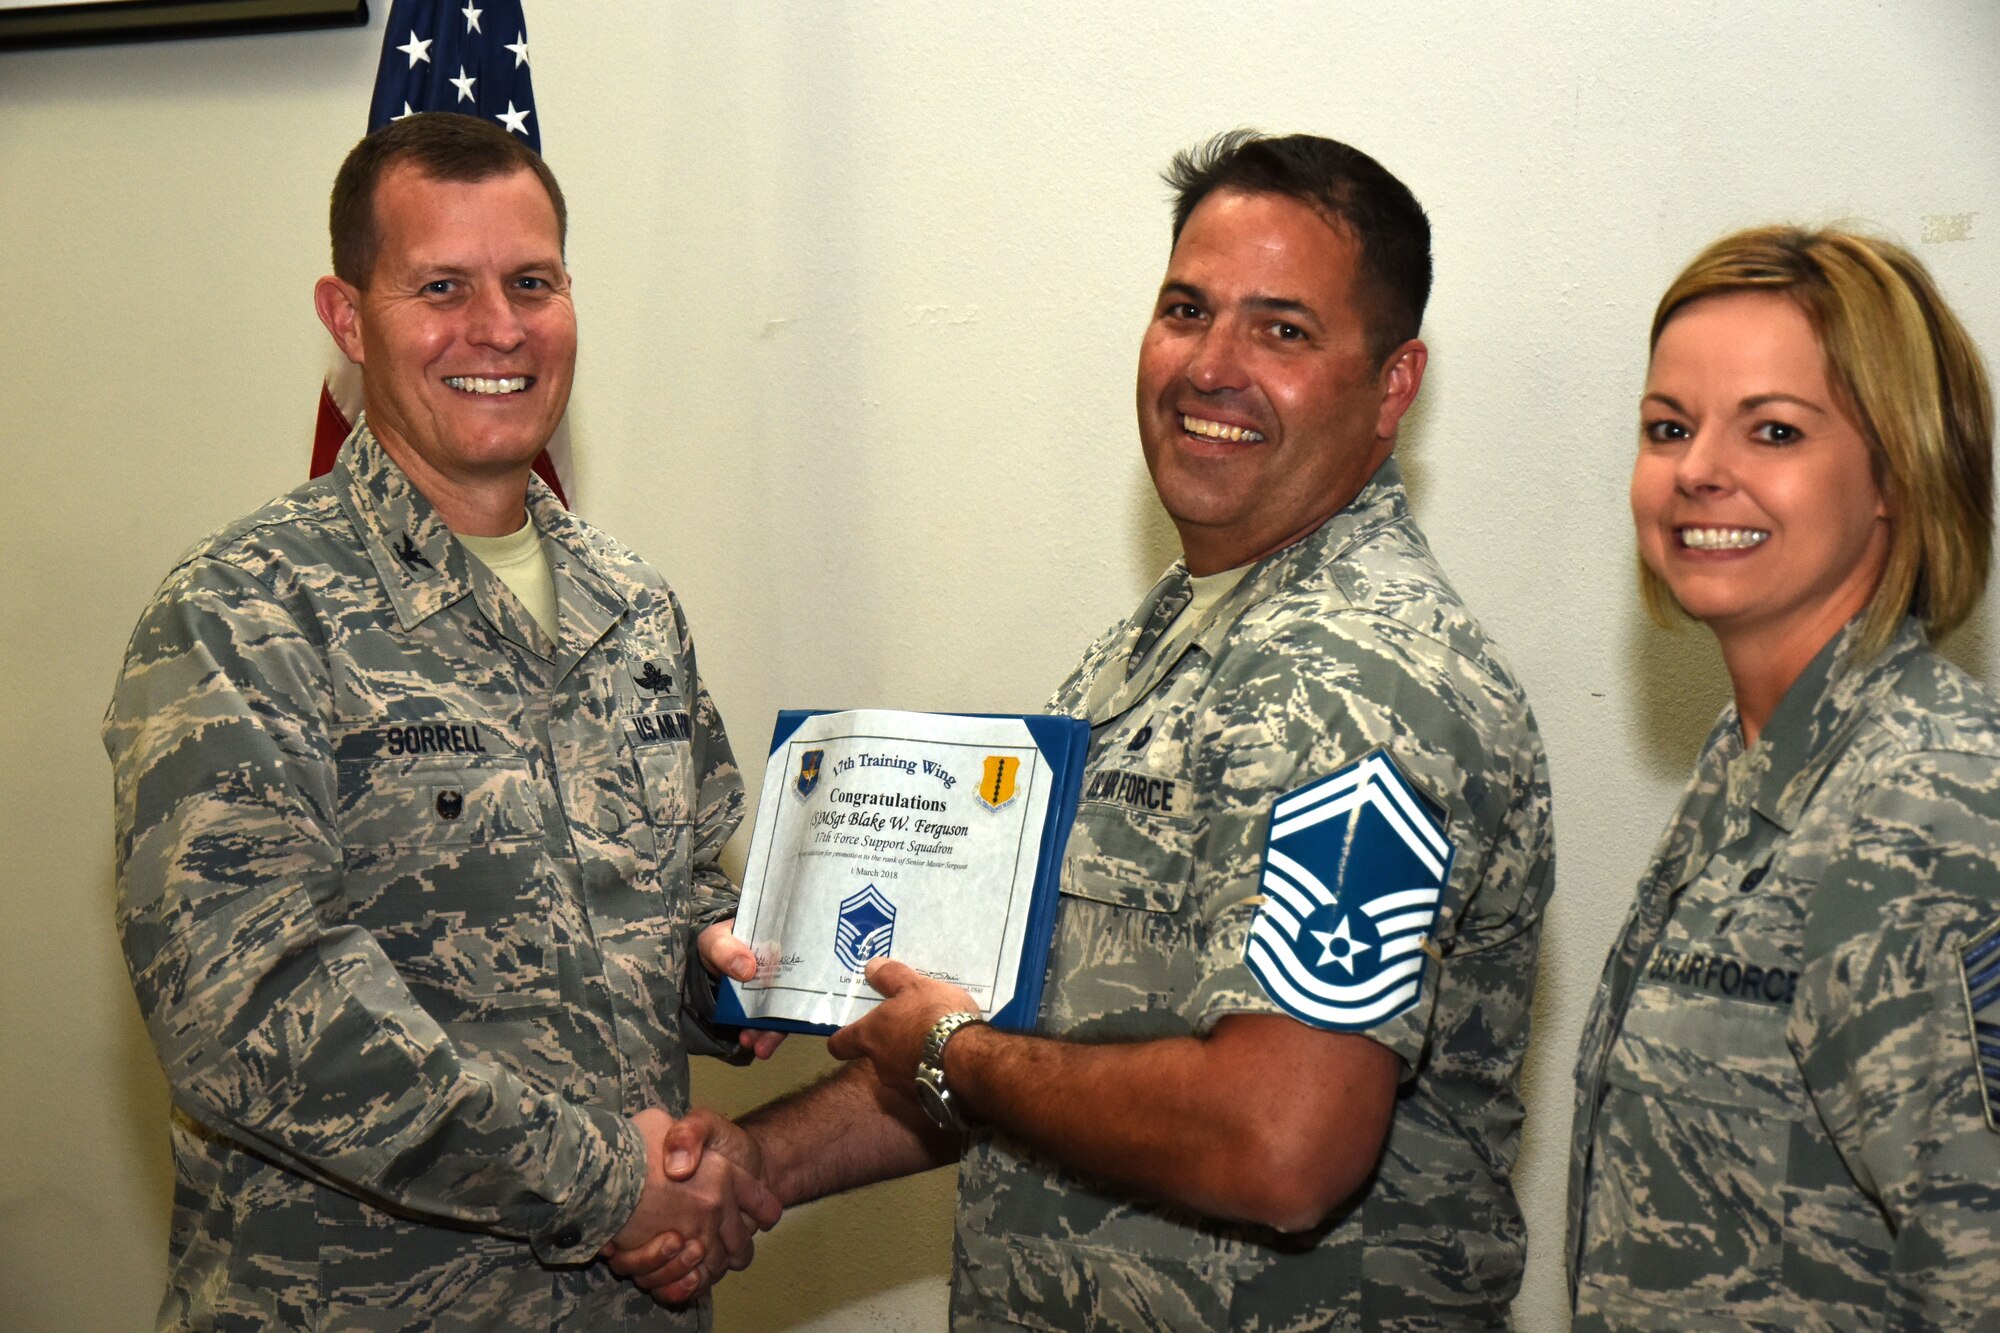 U.S. Air Force Col. Jeffrey Sorrell, 17th Training Wing vice commander, presents Master Sgt. Blake Ferguson, 17th Force Support Squadron Airman Leadership School commandant, a promotion certificate with Chief Master Sgt. Bobbie Reinsche, 17th Training Wing command chief, at the Event Center on Goodfellow Air Force Base, Texas, March 1, 2018. In celebration of individuals being selected for senior master sergeant, a party was held at the Event Center. (U.S. Air Force photo by Airman 1st Class Seraiah Hines/Released)